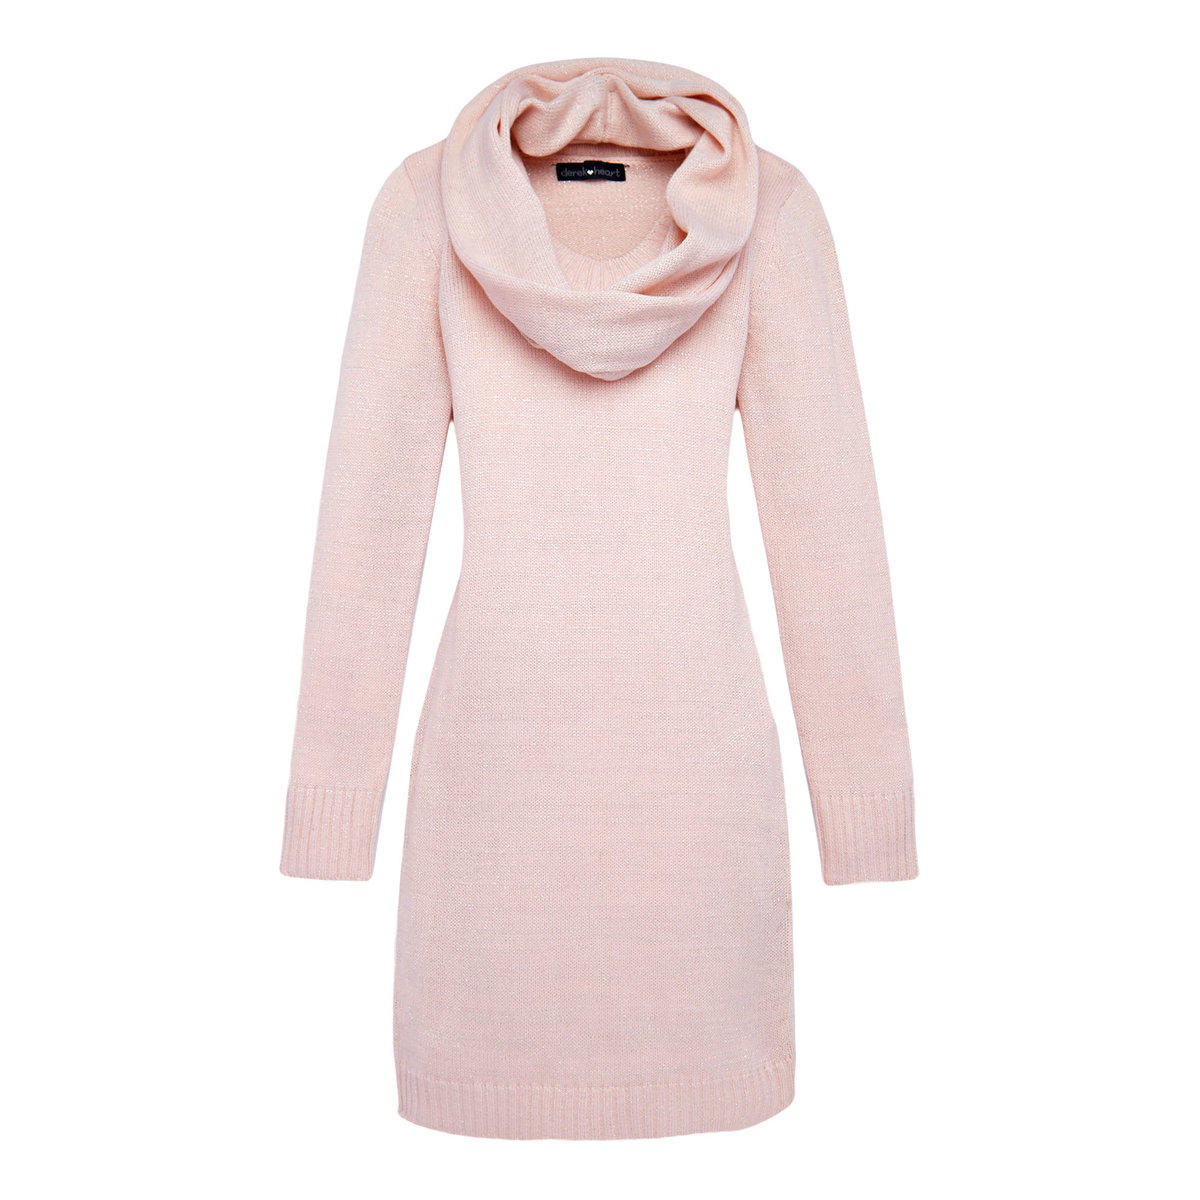 111346493-Twofer Metallic Sweater Dress with Infinity Scarf Rose Quartz Small-1